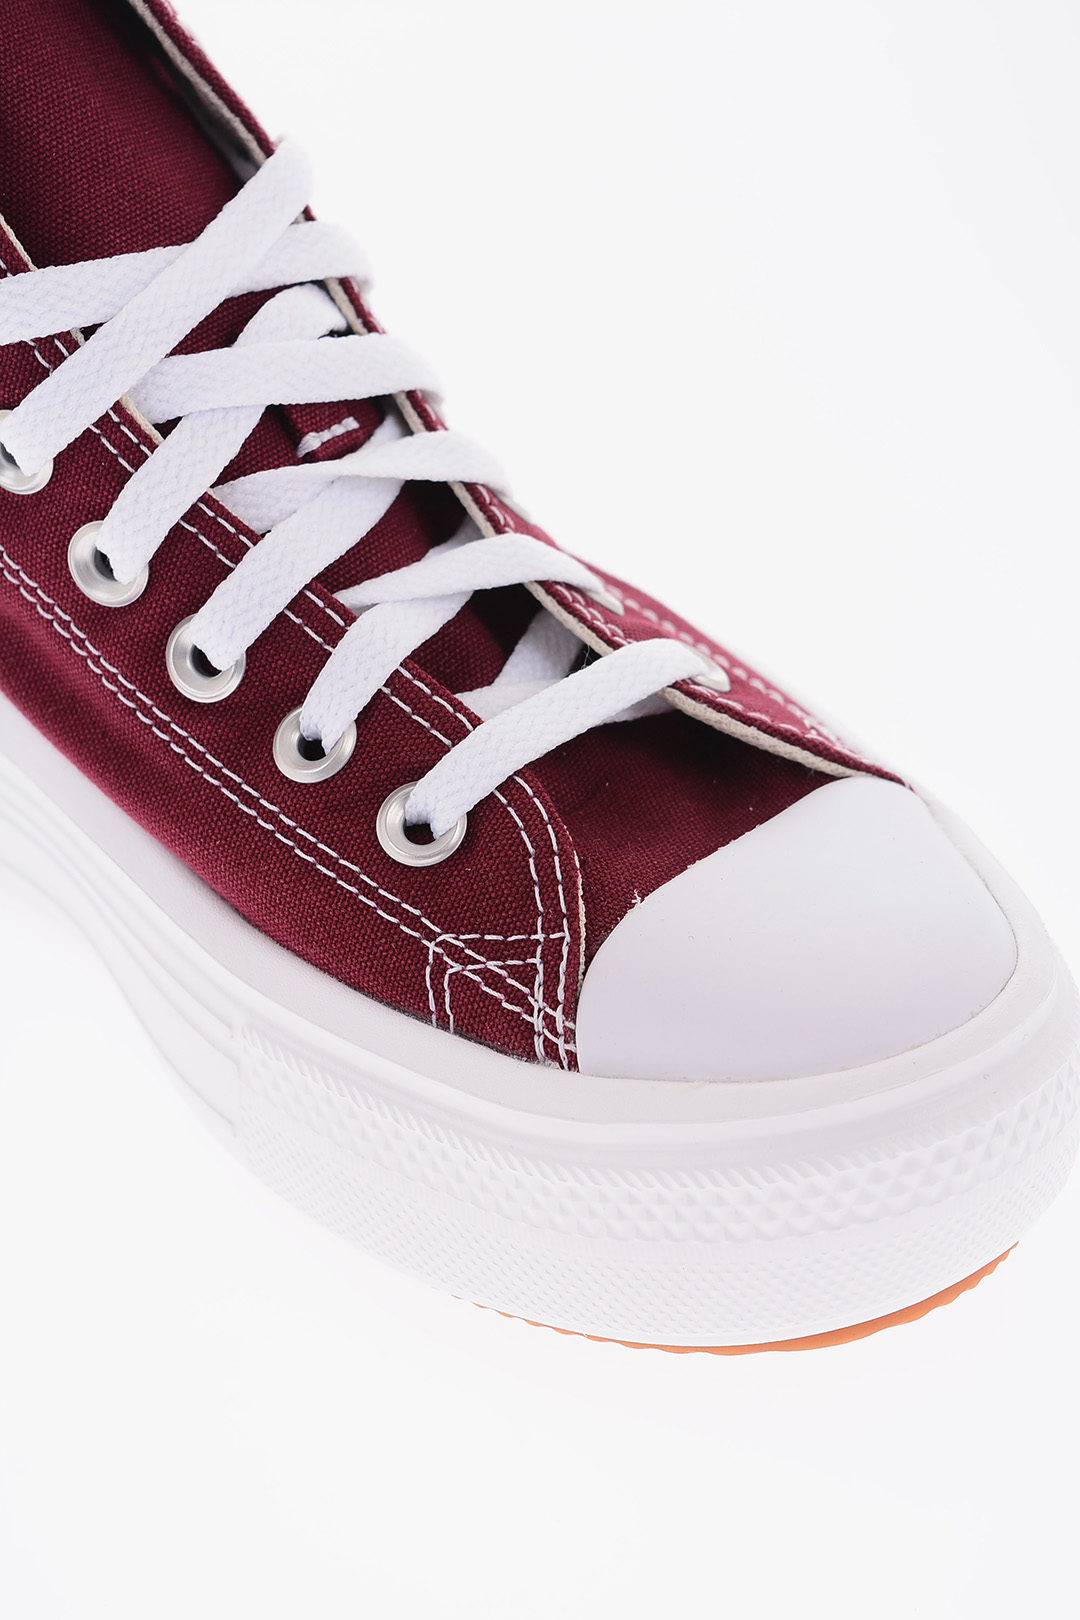 Converse ALL STAR CHUCK TAYLOR Cotton Top Sneakers with women - Glamood Outlet